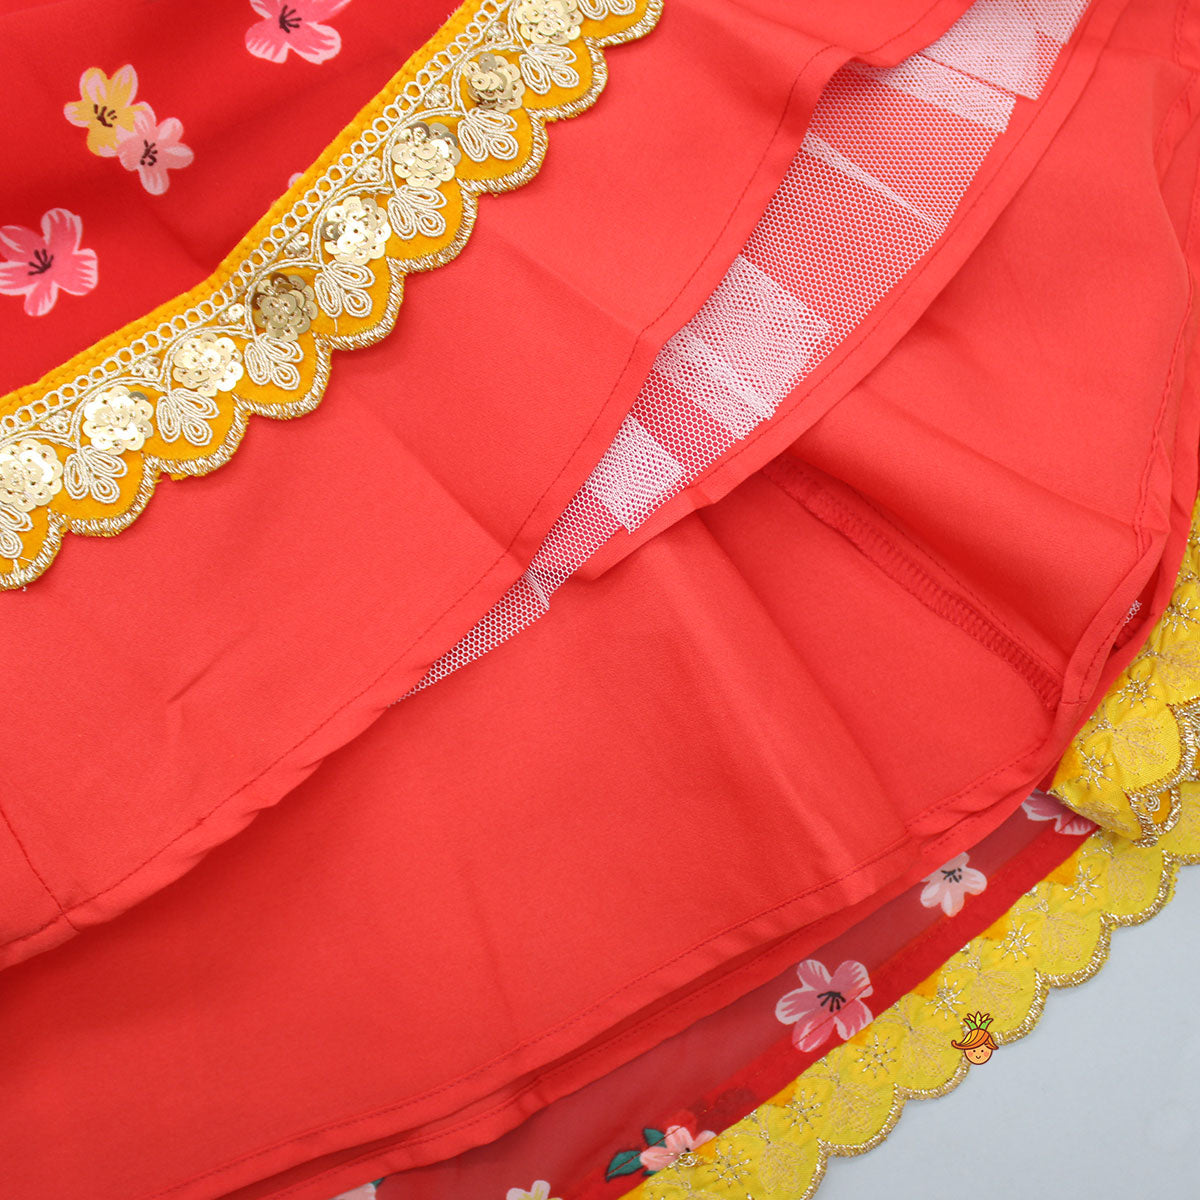 Scalloped Lace Detail Red Floral Top And Lehenga With Ruffle Dupatta